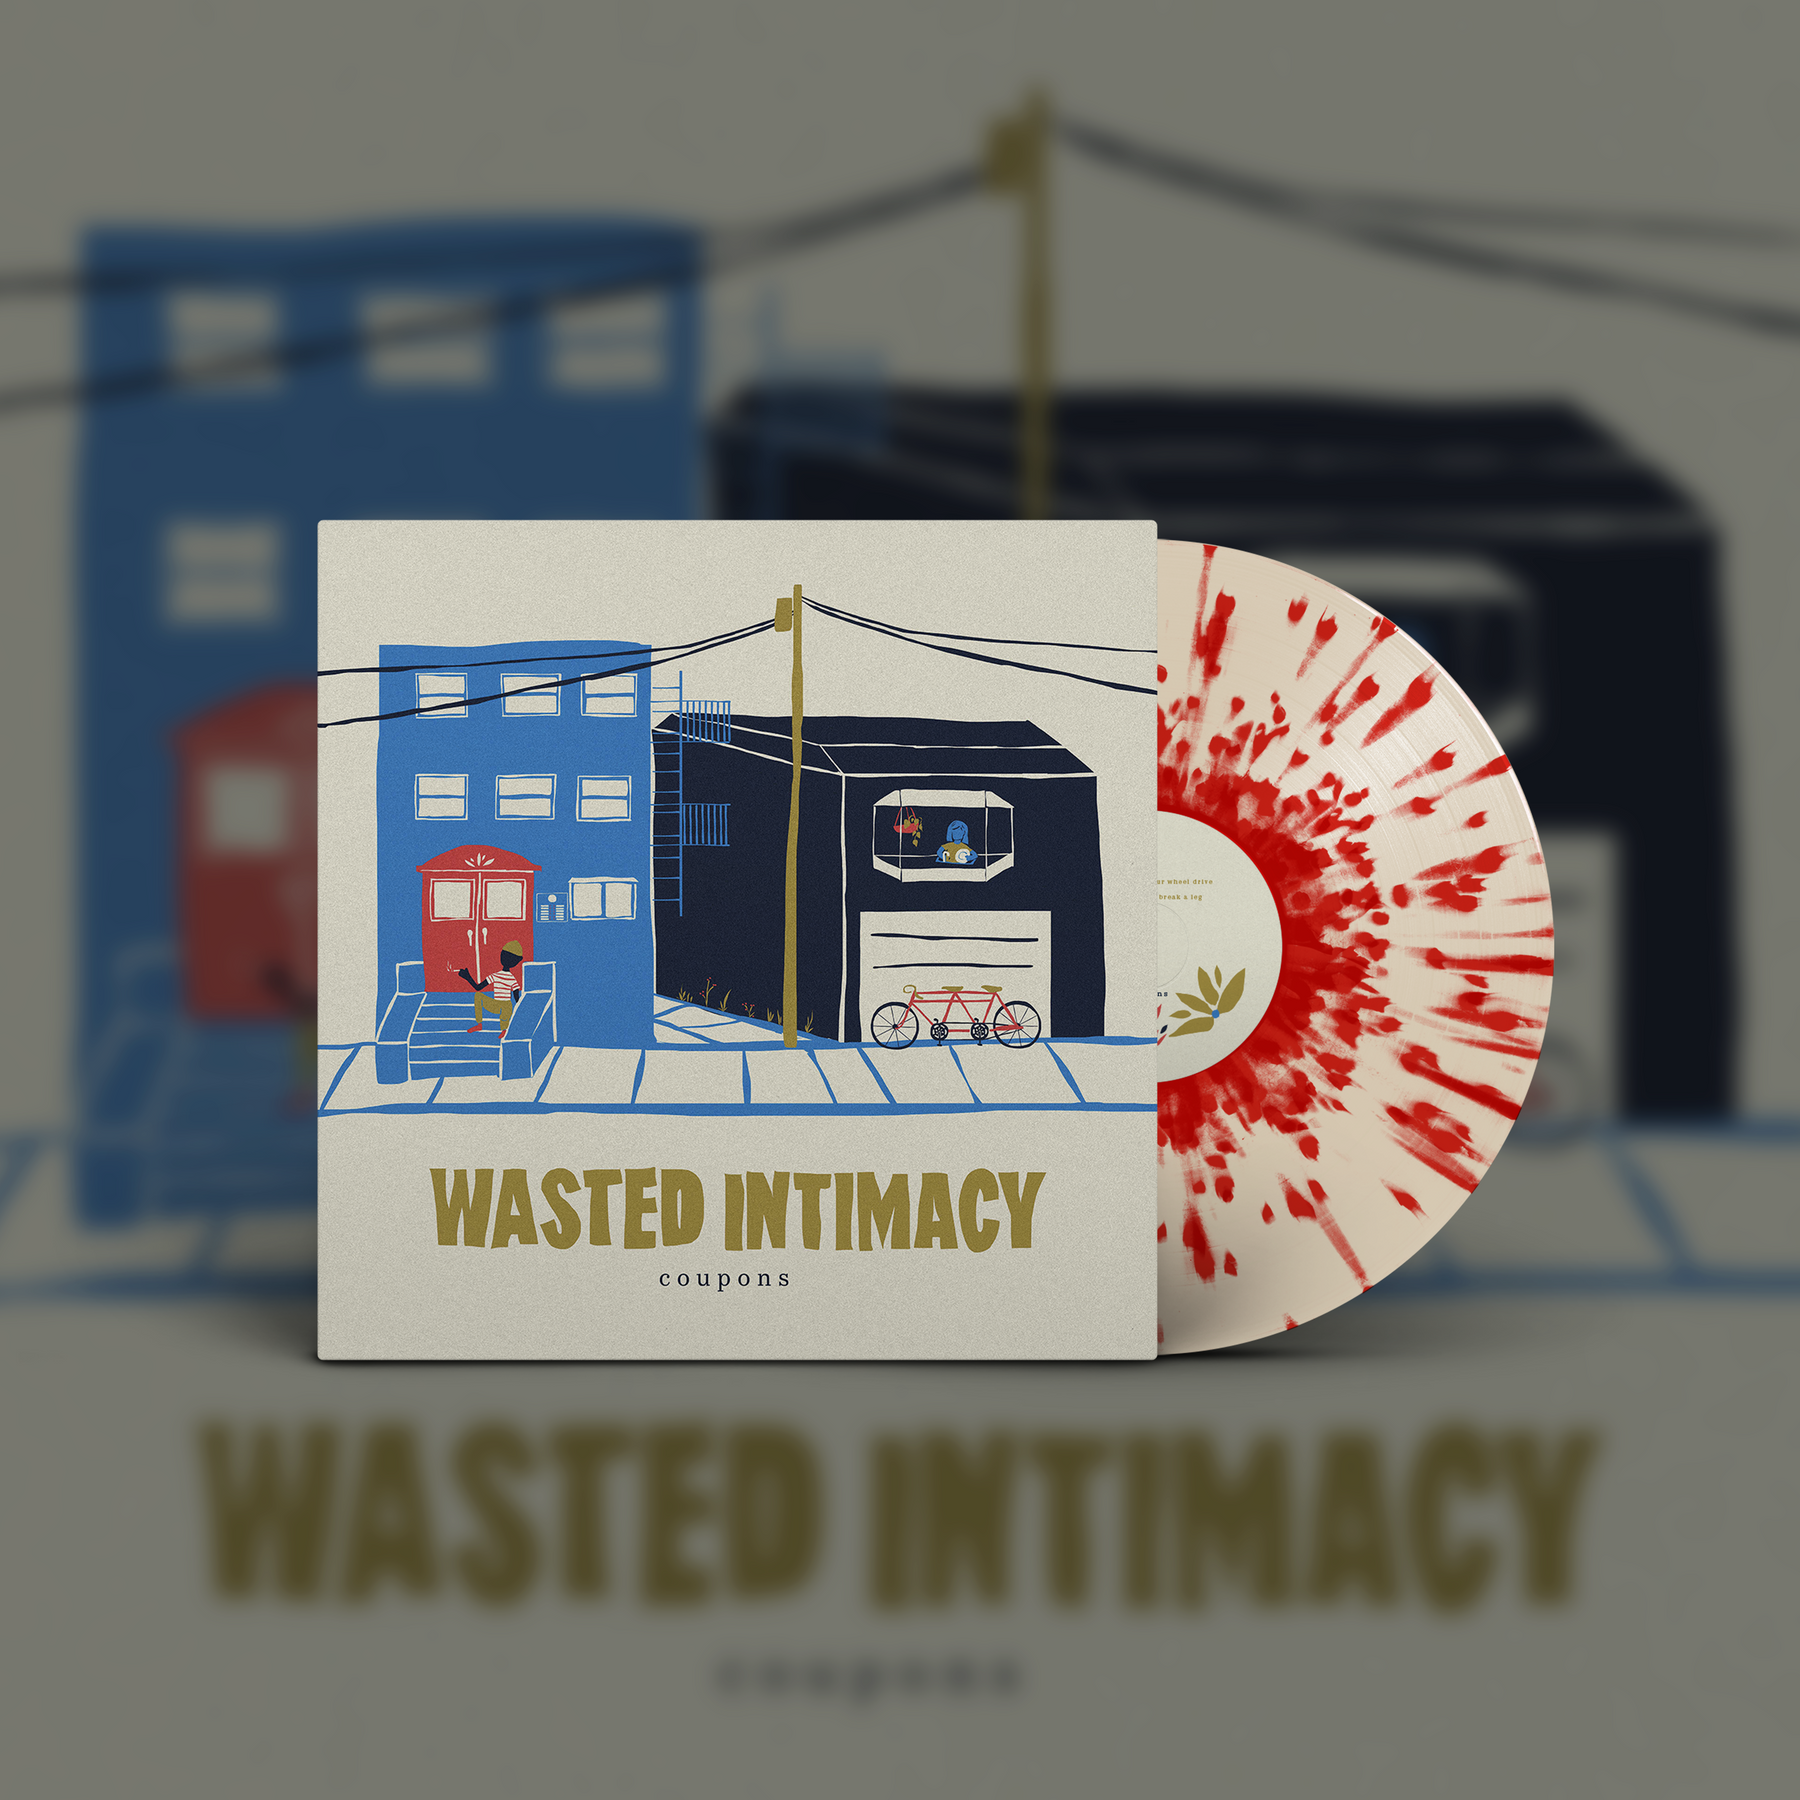 Coupons - Wasted Intimacy